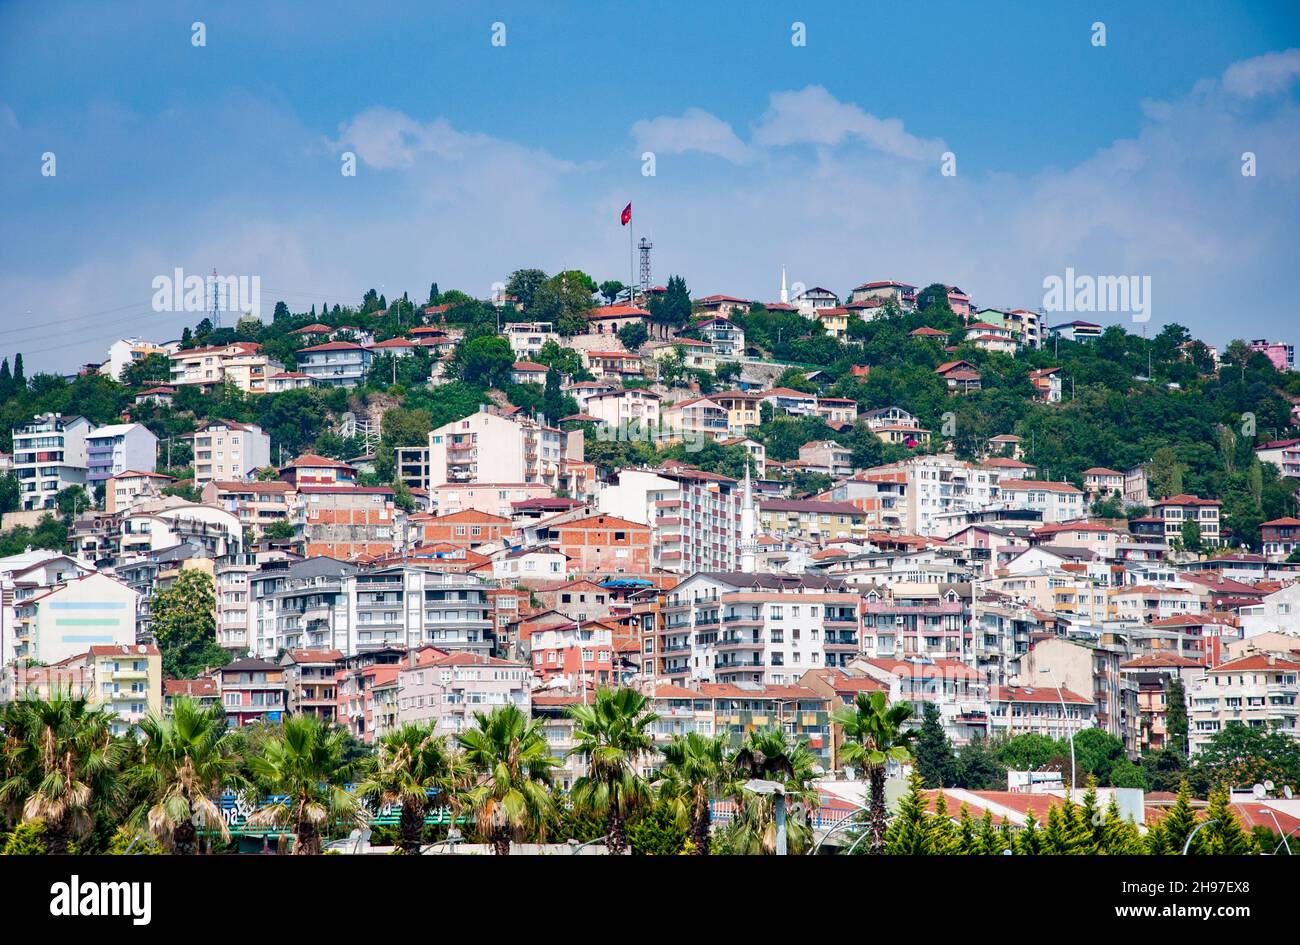 IZMIT, TURKEY. AUGUST 29, 2021. Beautiful panoramic view to the summer town. Houses and palms on the background Stock Photo